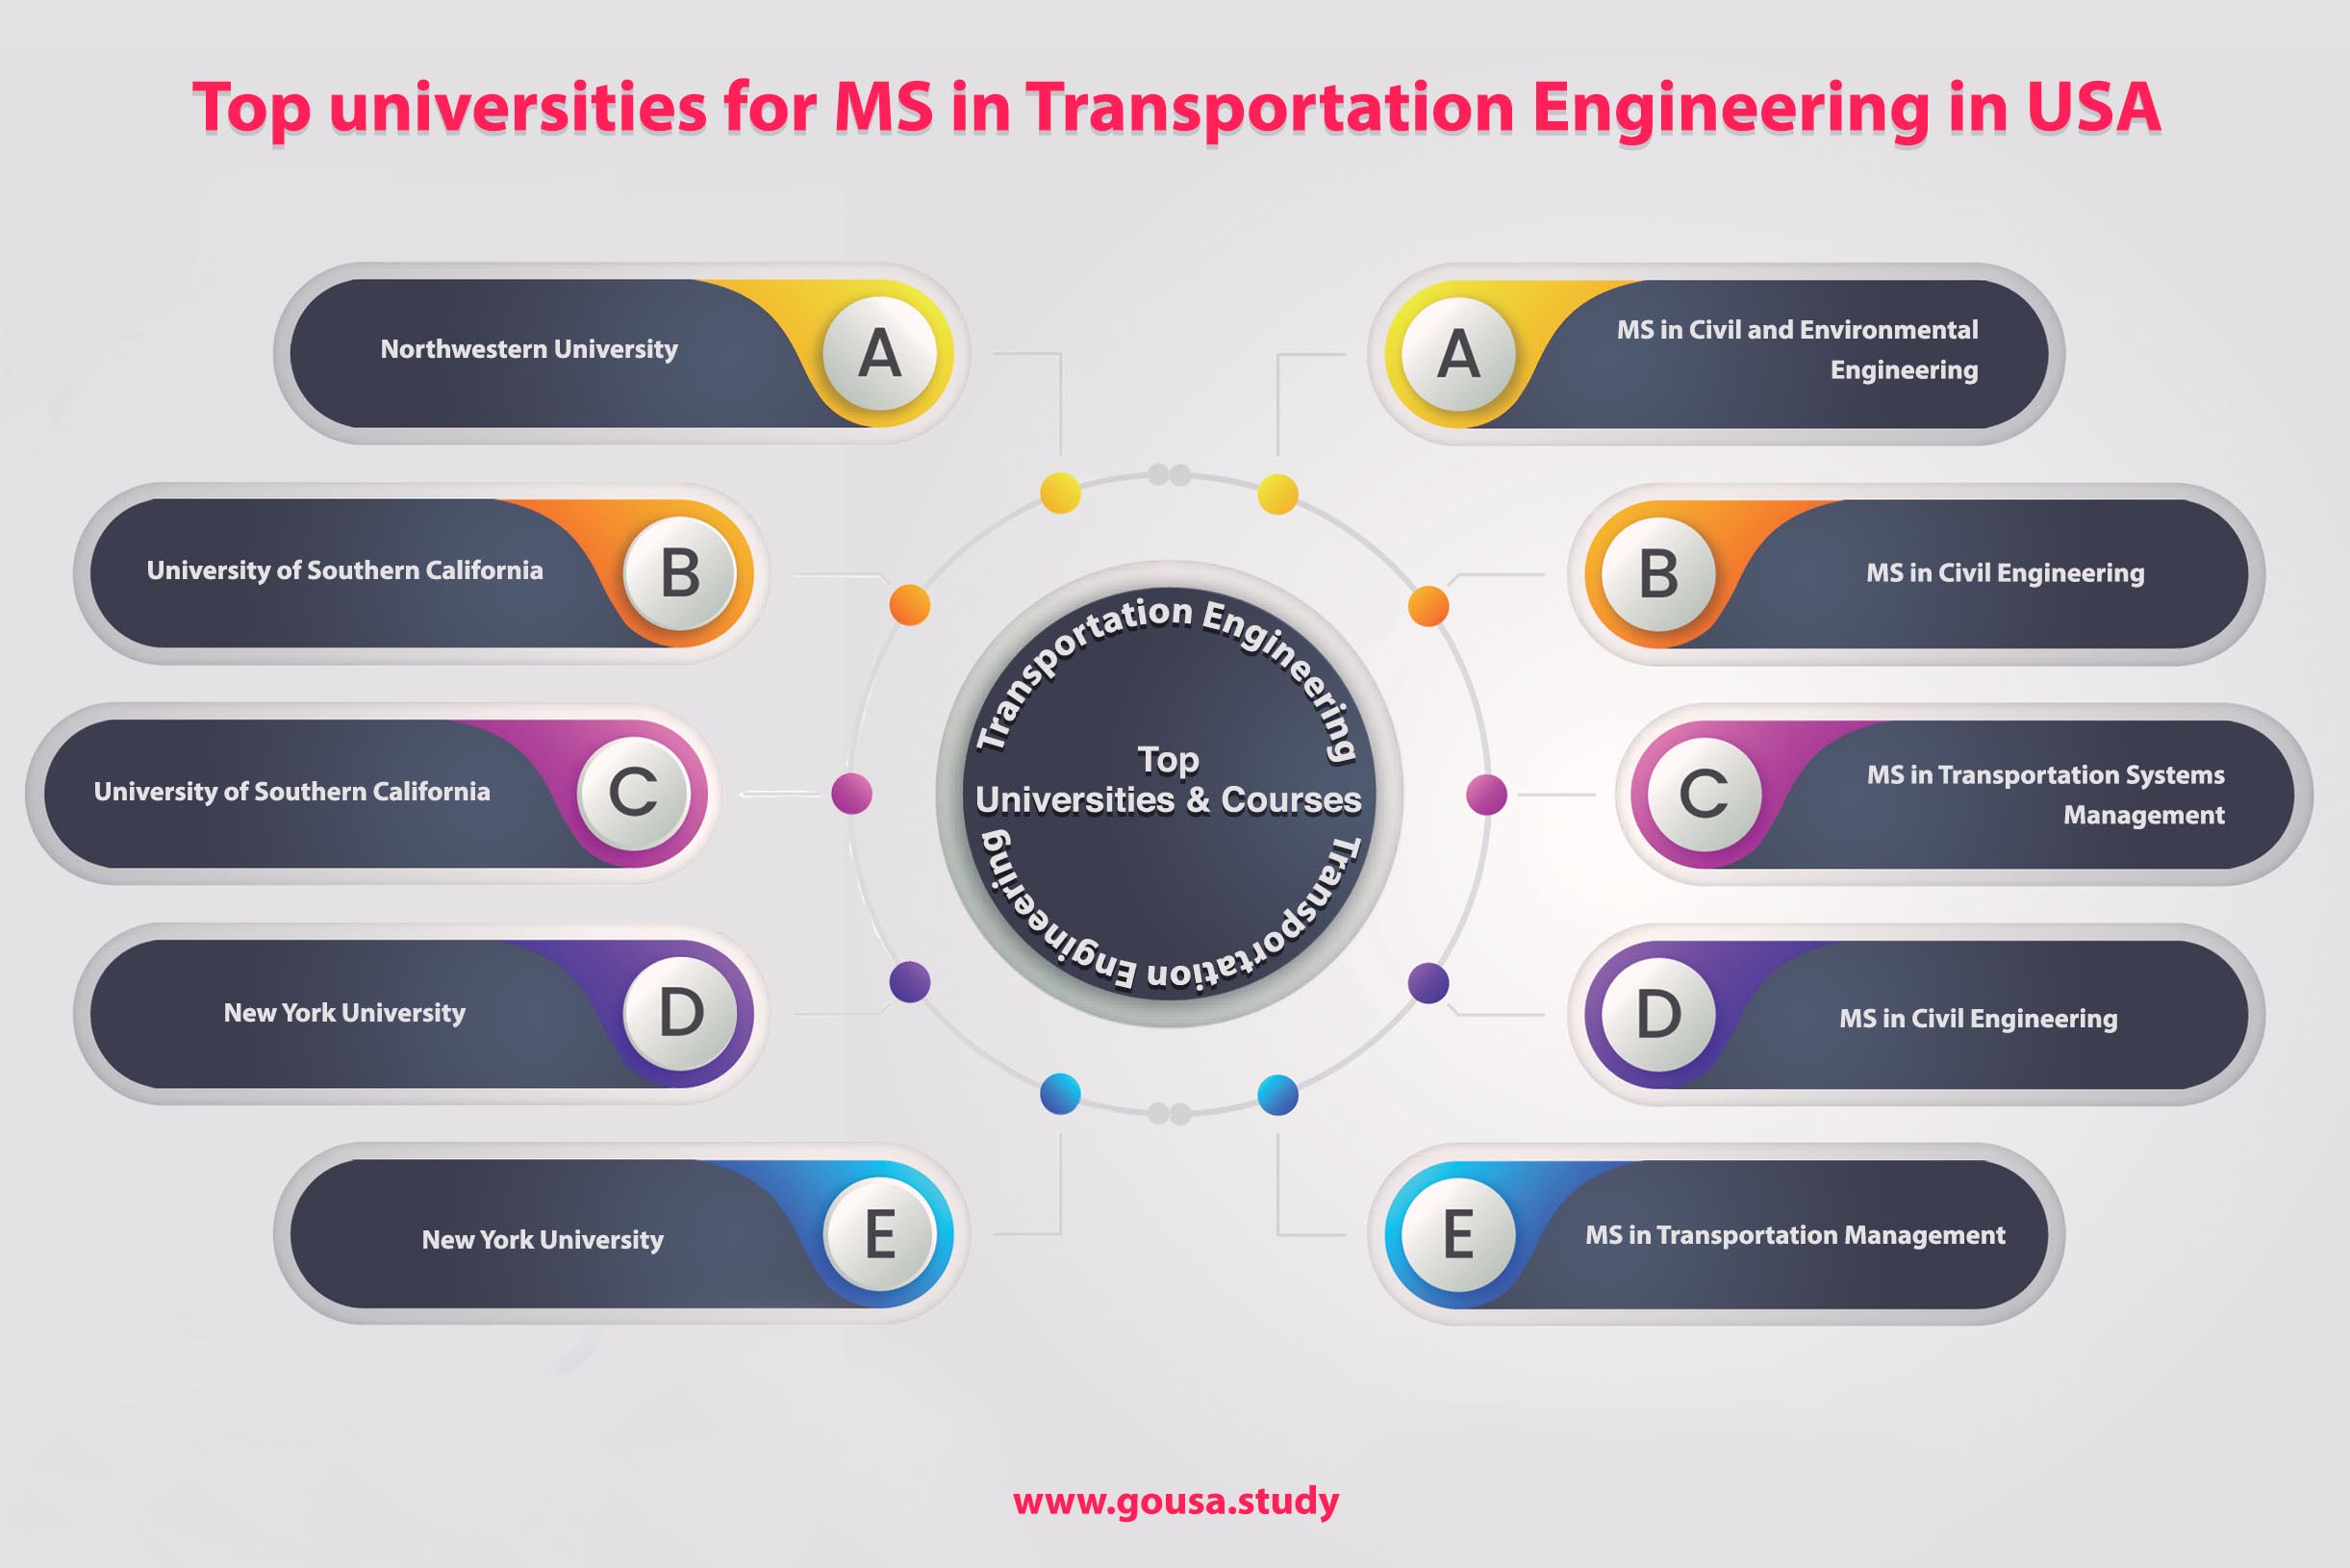 Top Universities for MS in Transportation Engineering in USA